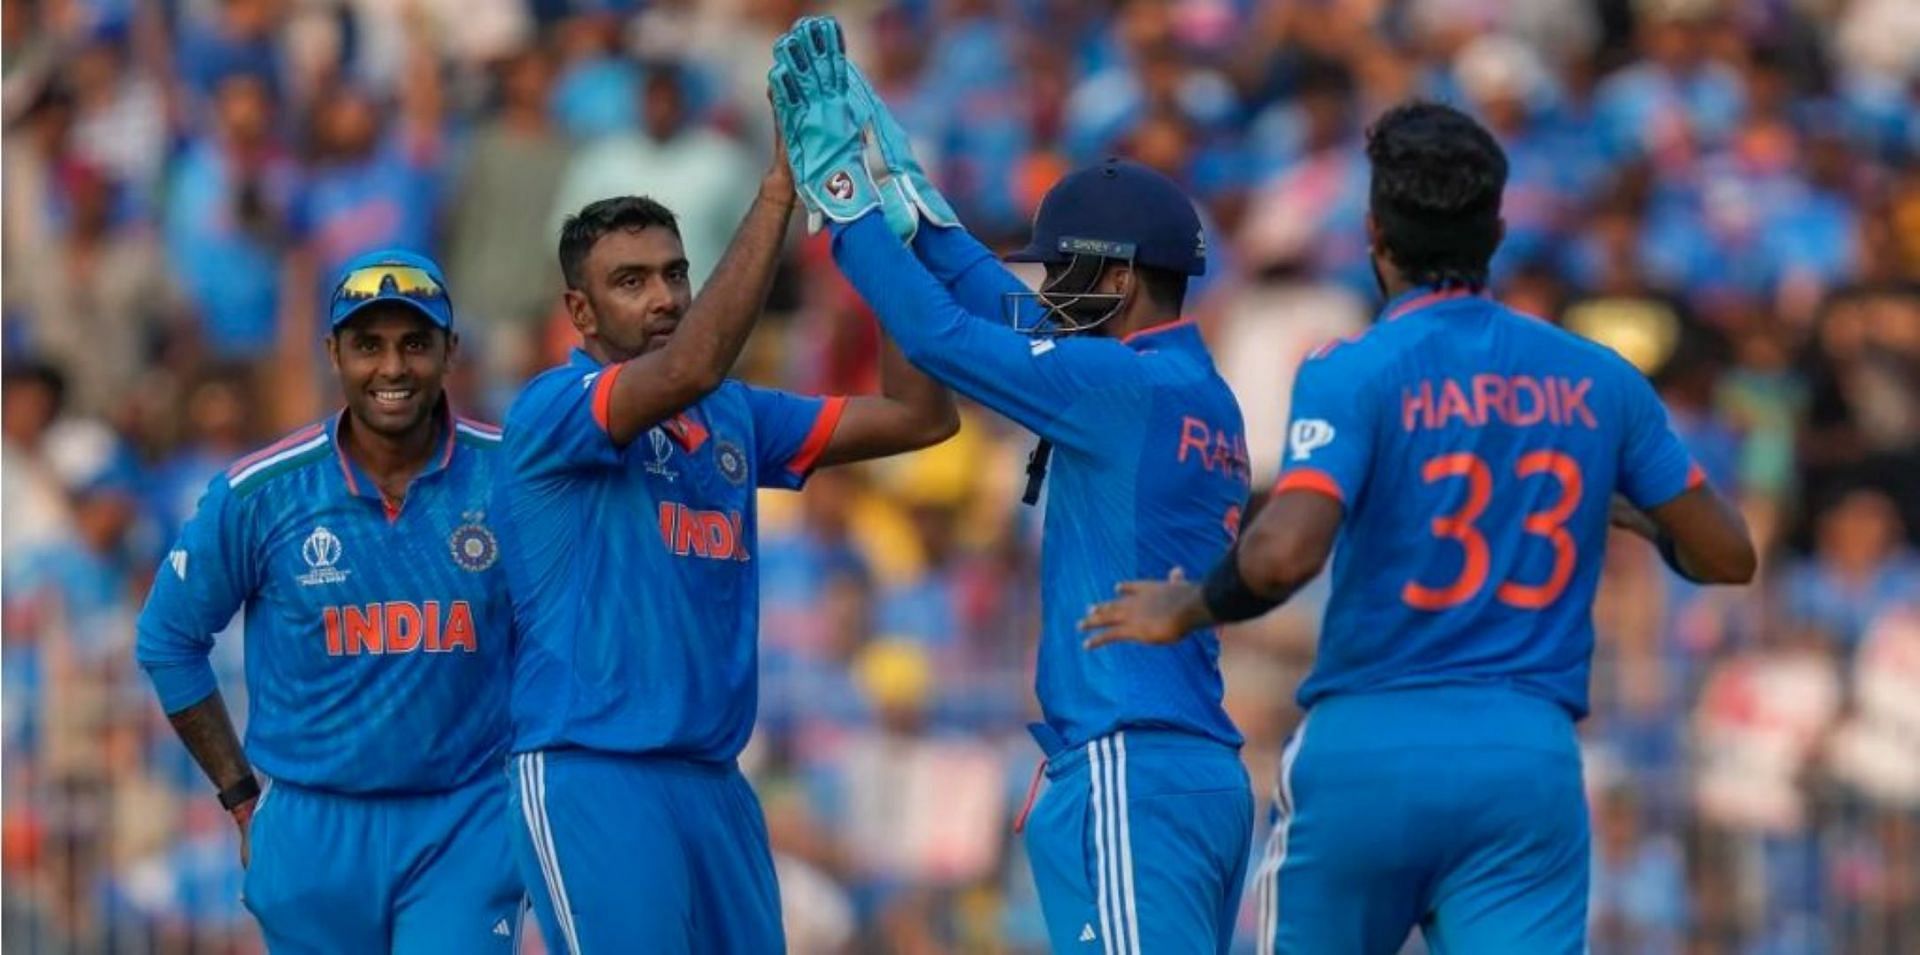 Ashwin has impressed with the ball since his return to the Indian ODI side